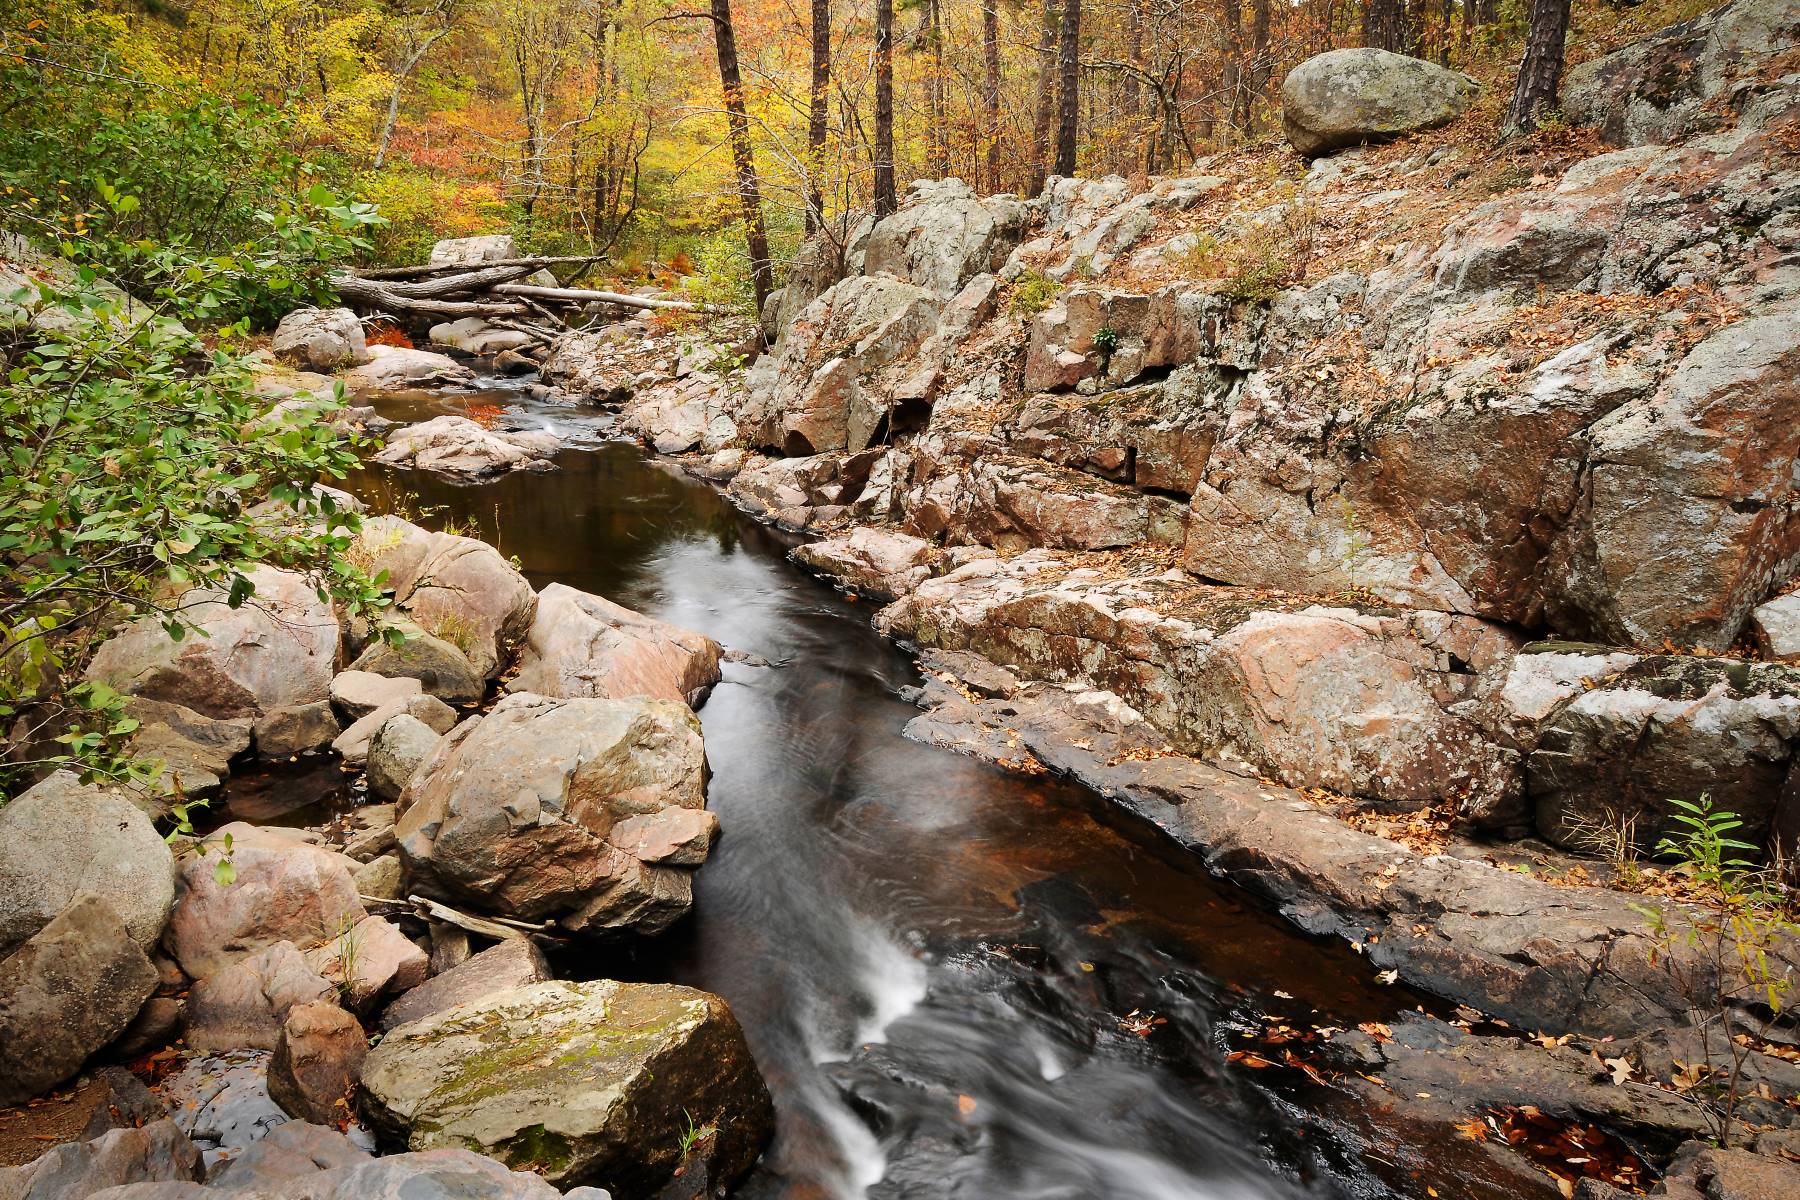 Pickle springs in Hawn State Park offers peaceful Missouri hiking